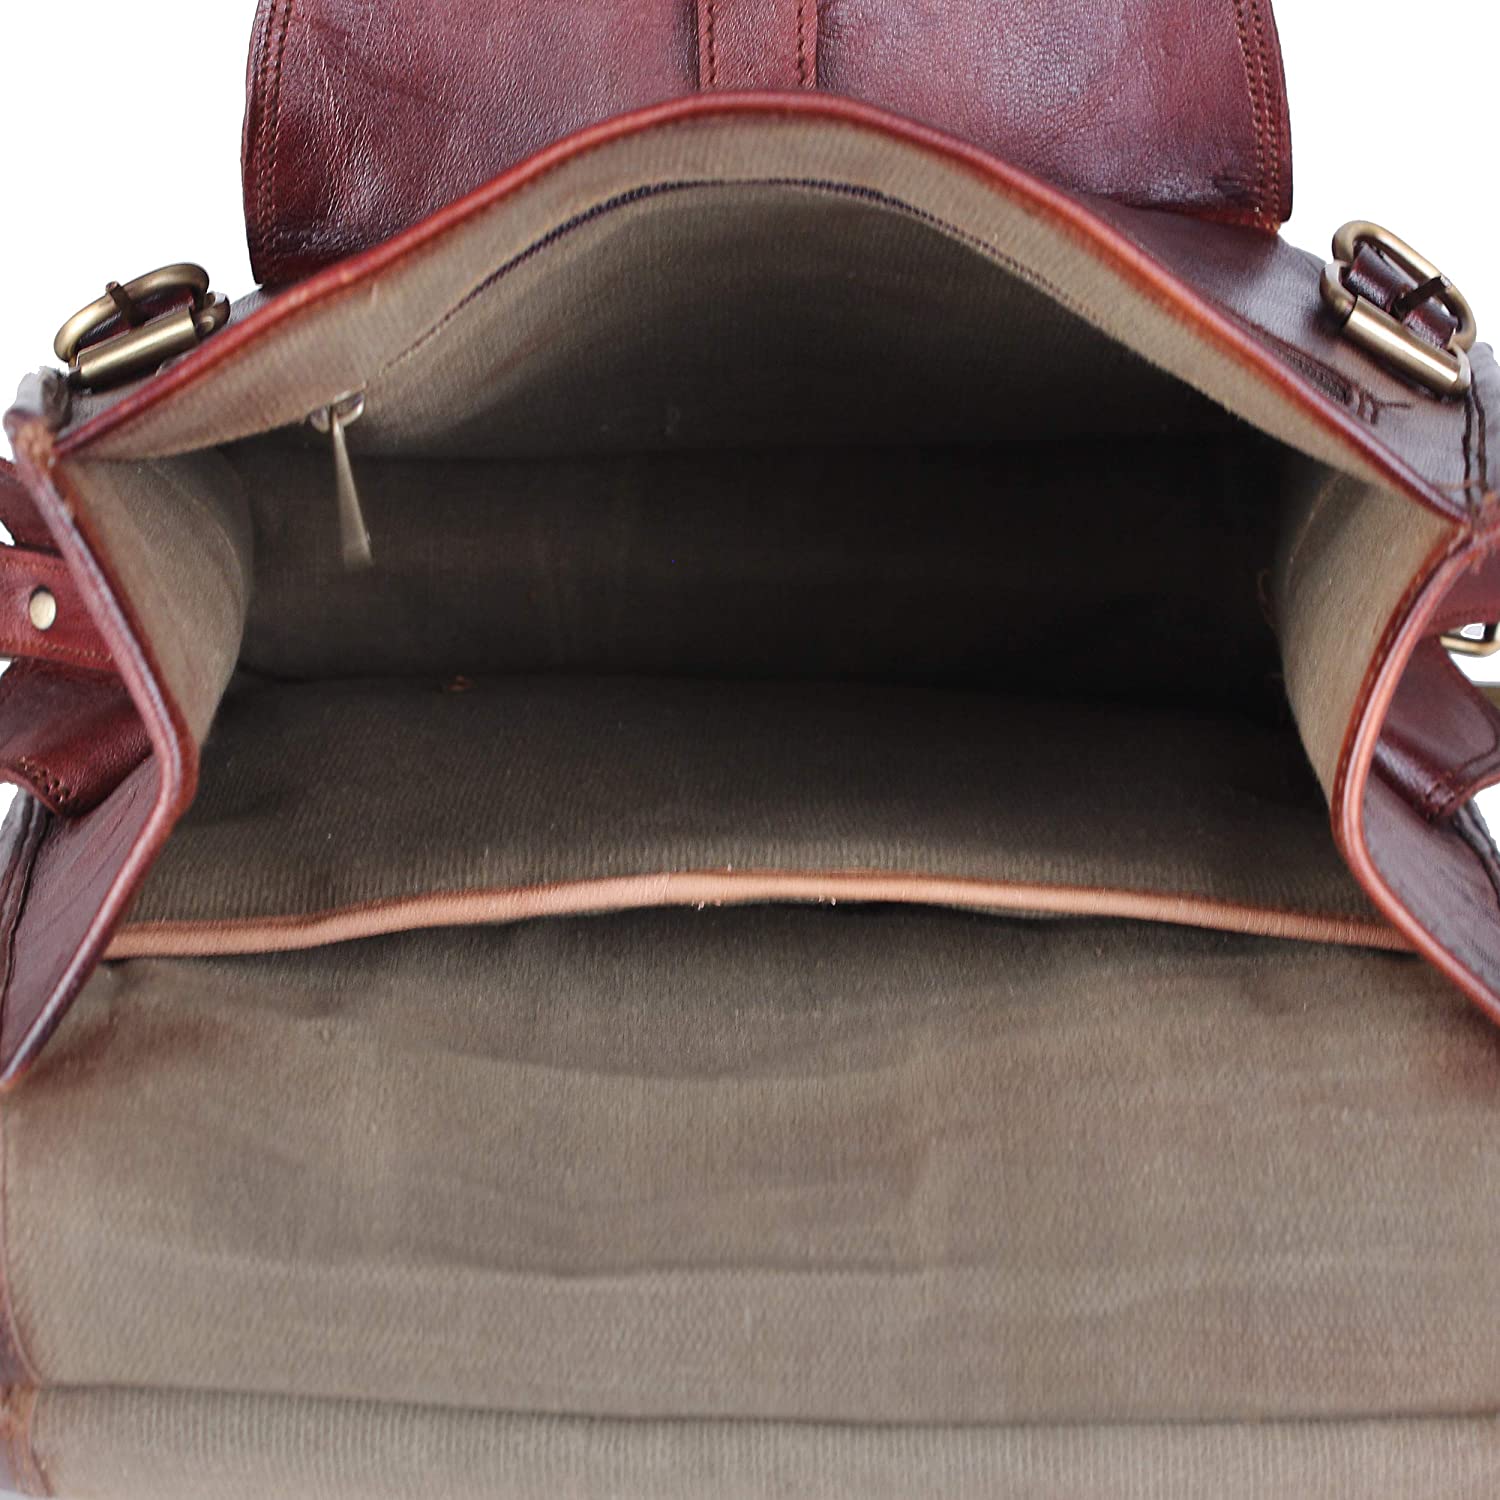 inside view of laptop leather backpack